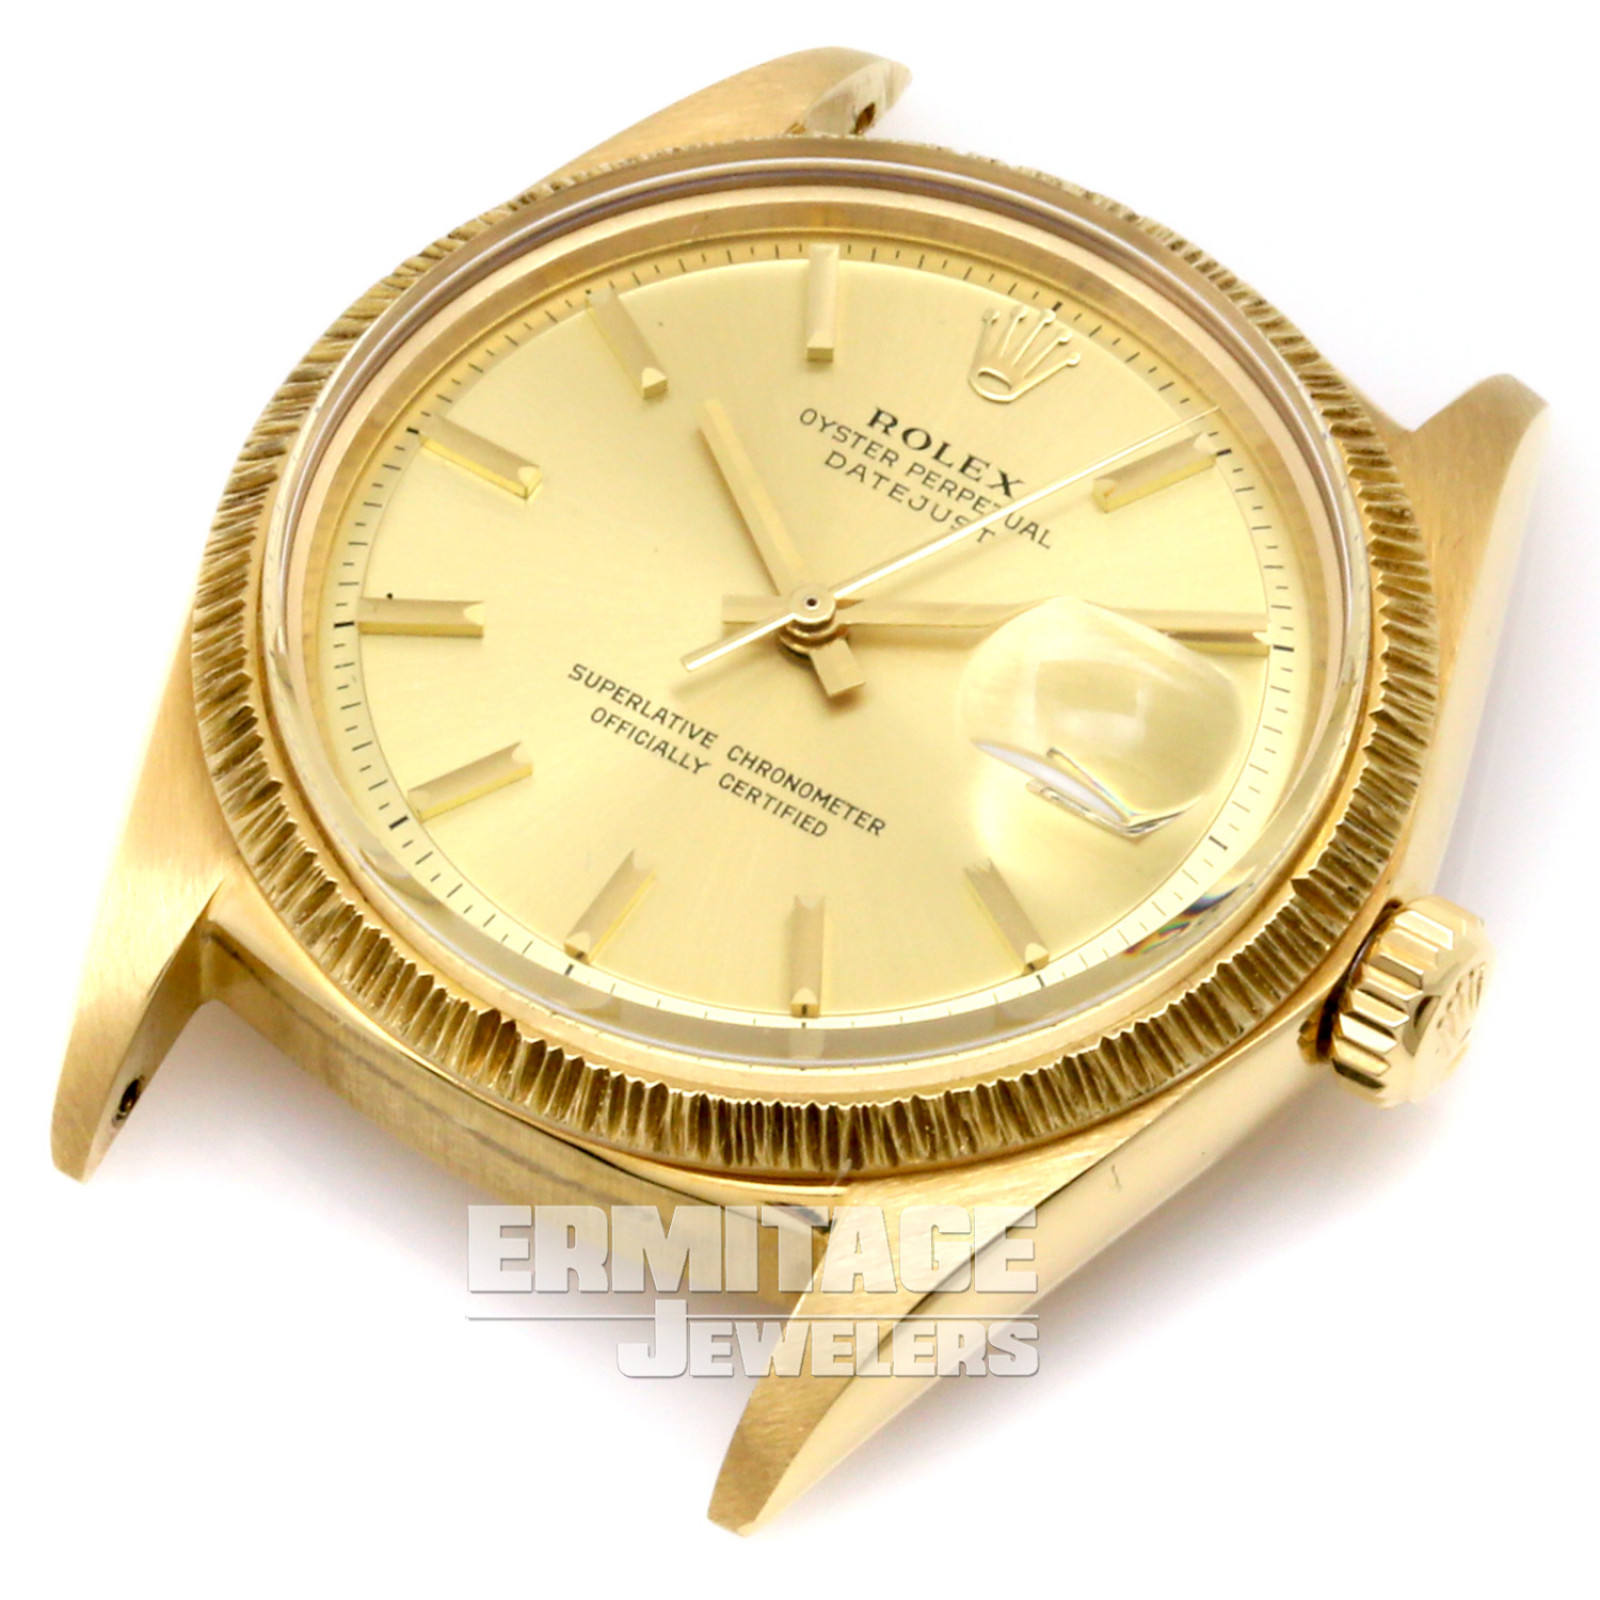 Rolex Datejust 1607 with Champagne Dial